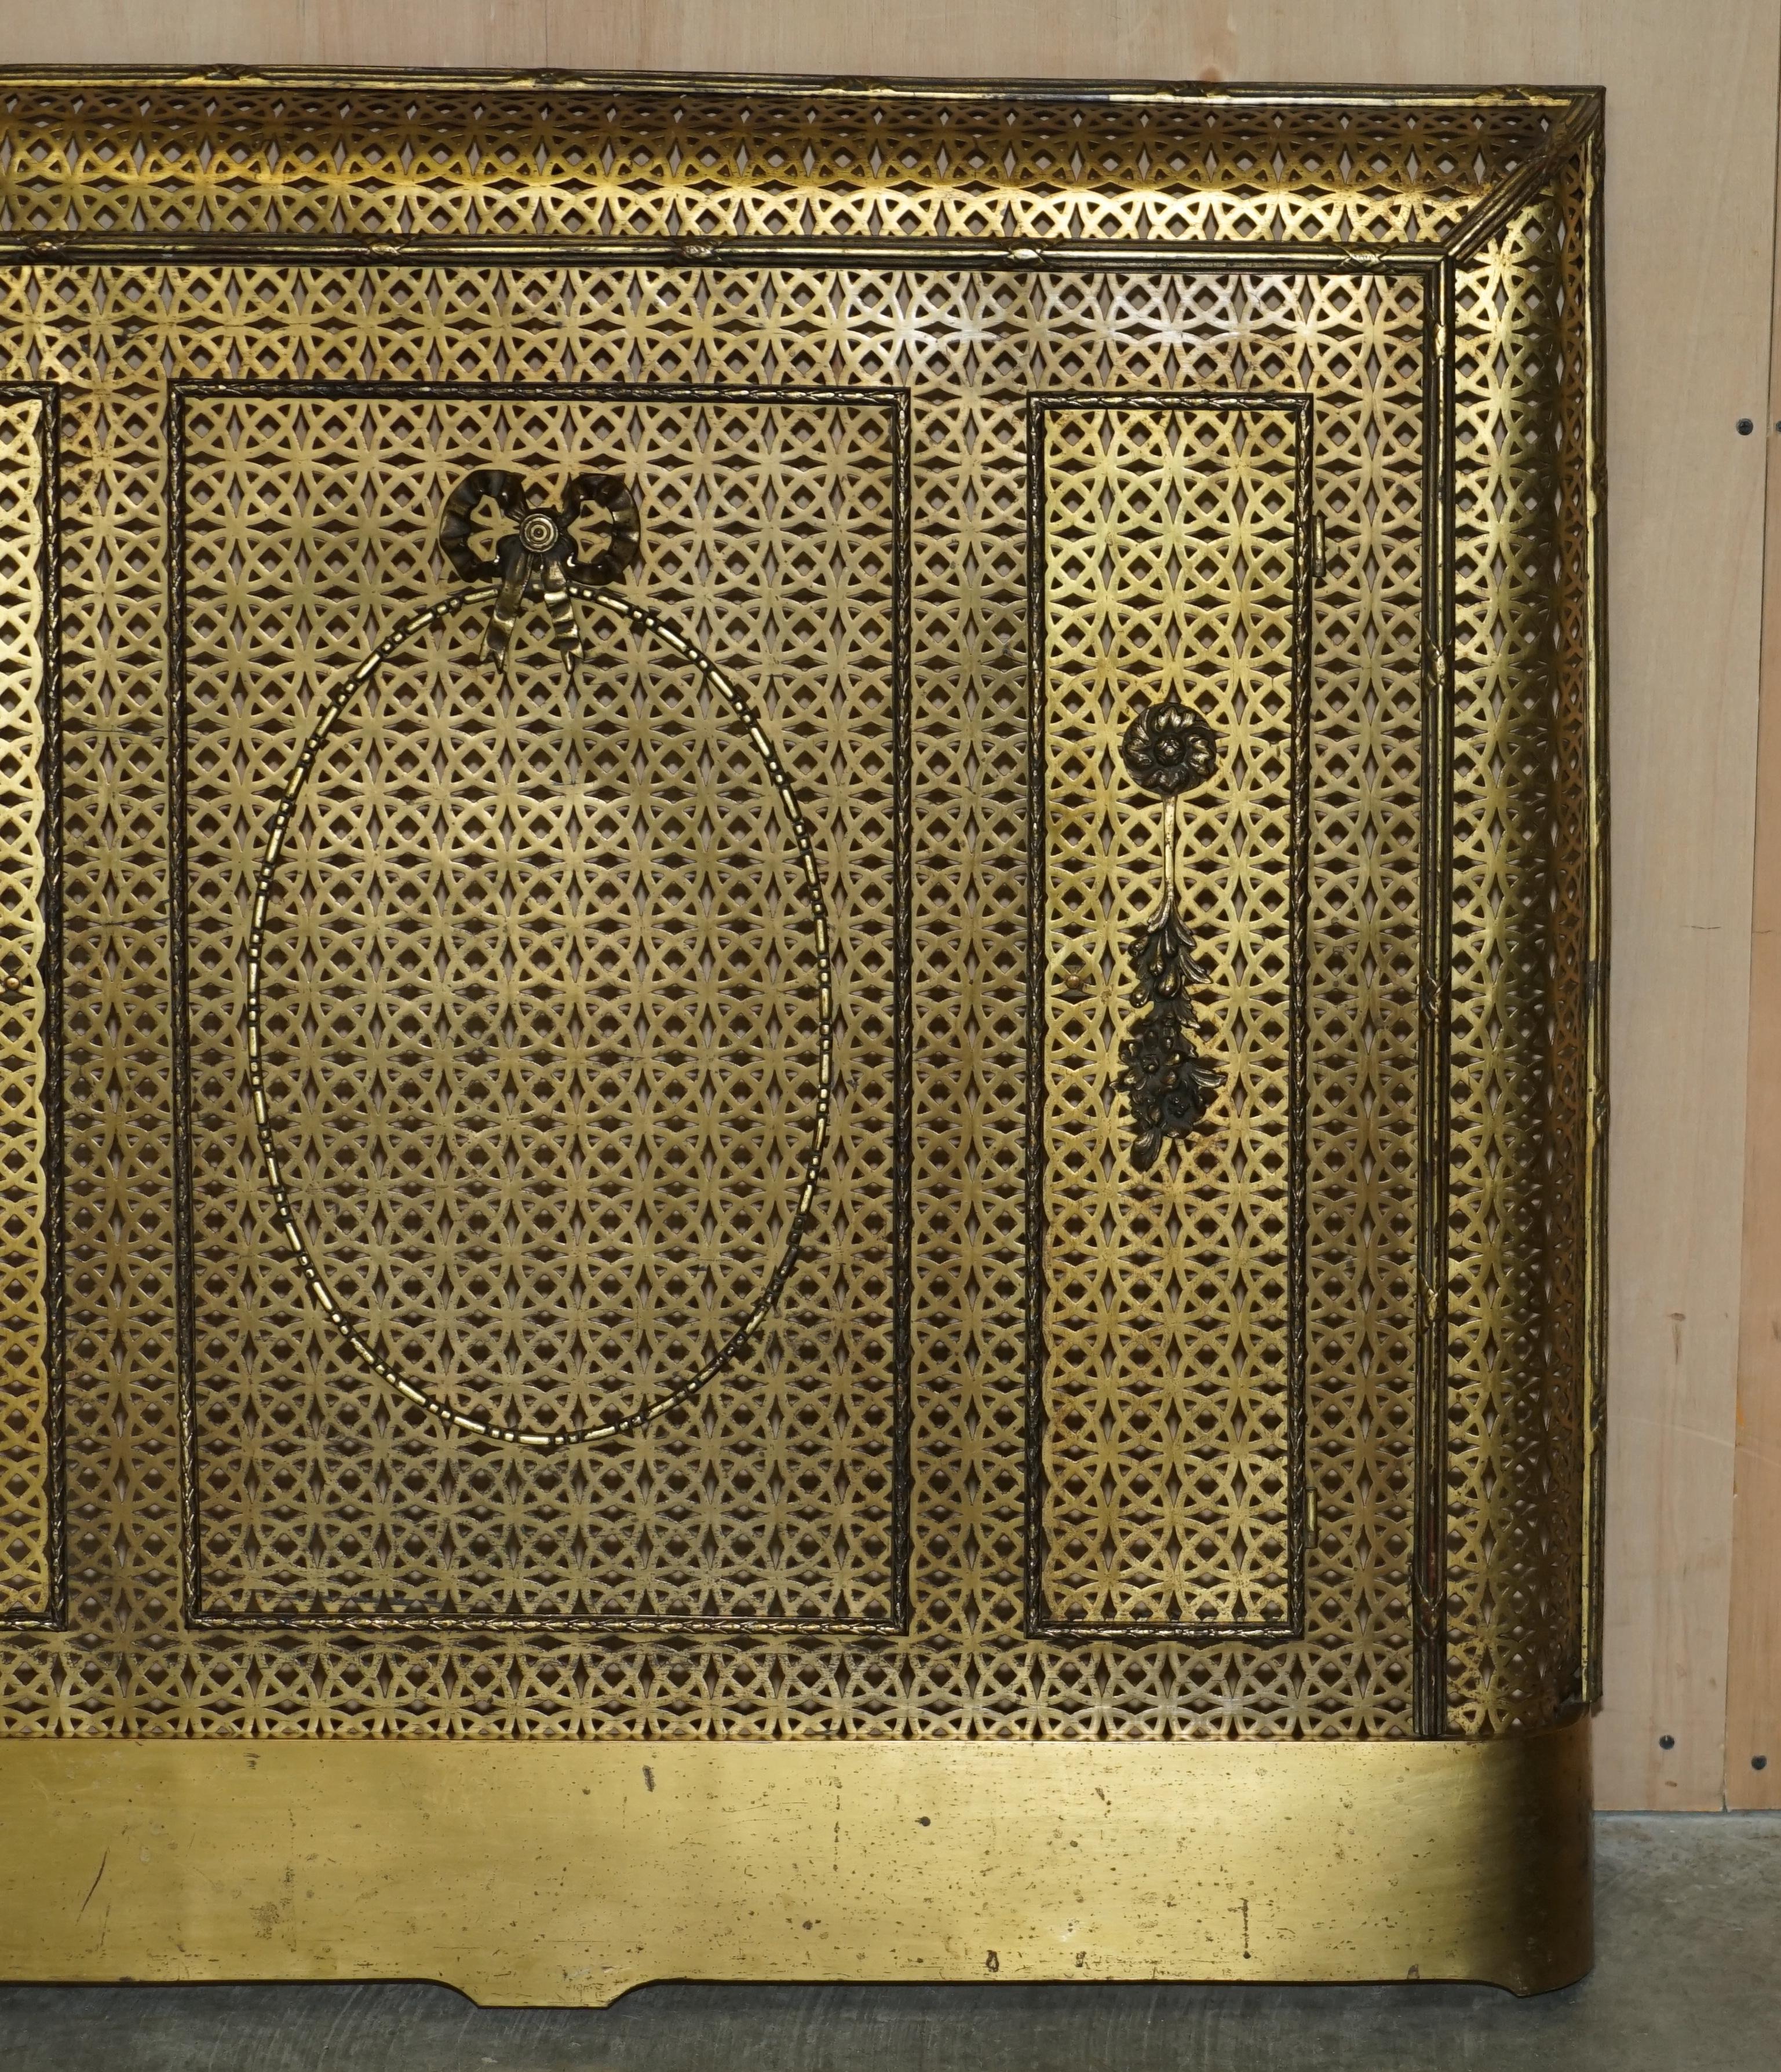 Early 20th Century Antique circa 1920 Art Deco French Brass Pierced Sheet Radiator Cover with Doors